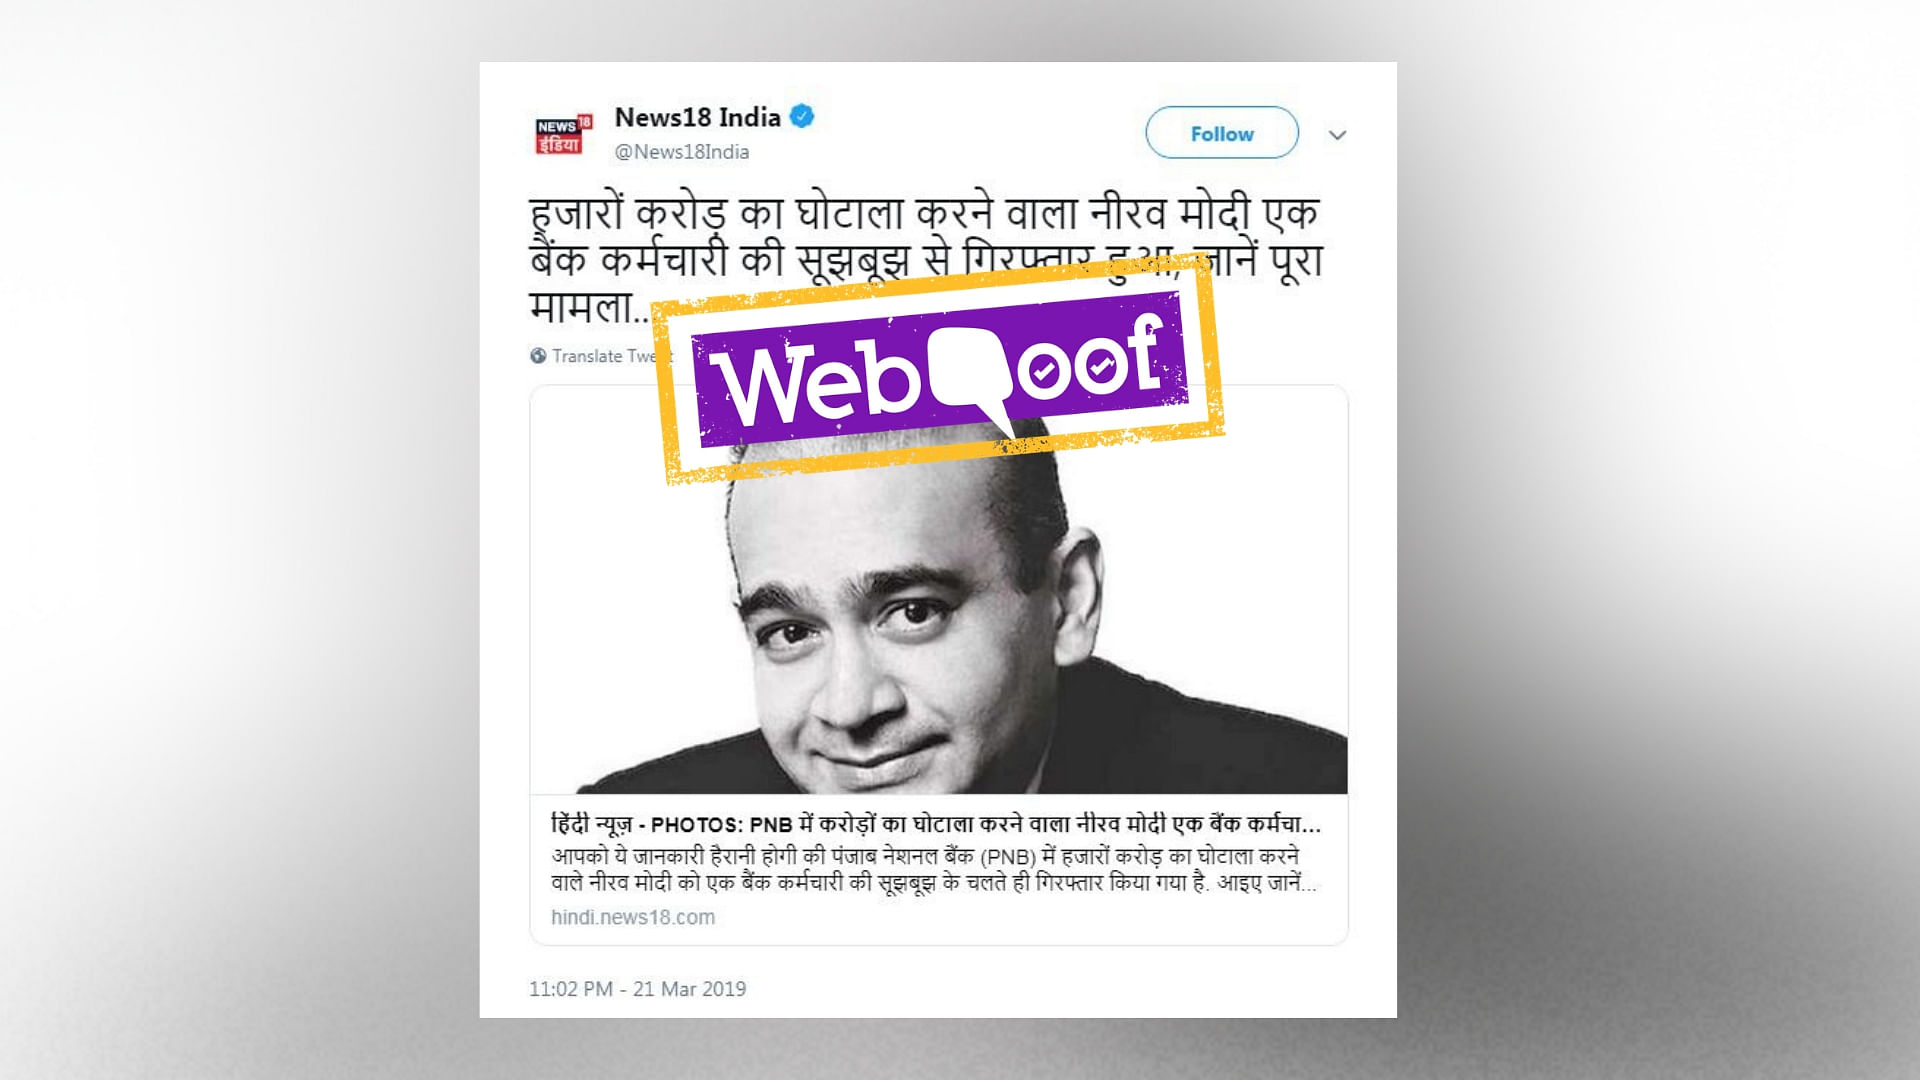 The News18 tweet has been morphed to make it appear as though Modi gave the statement as claimed.